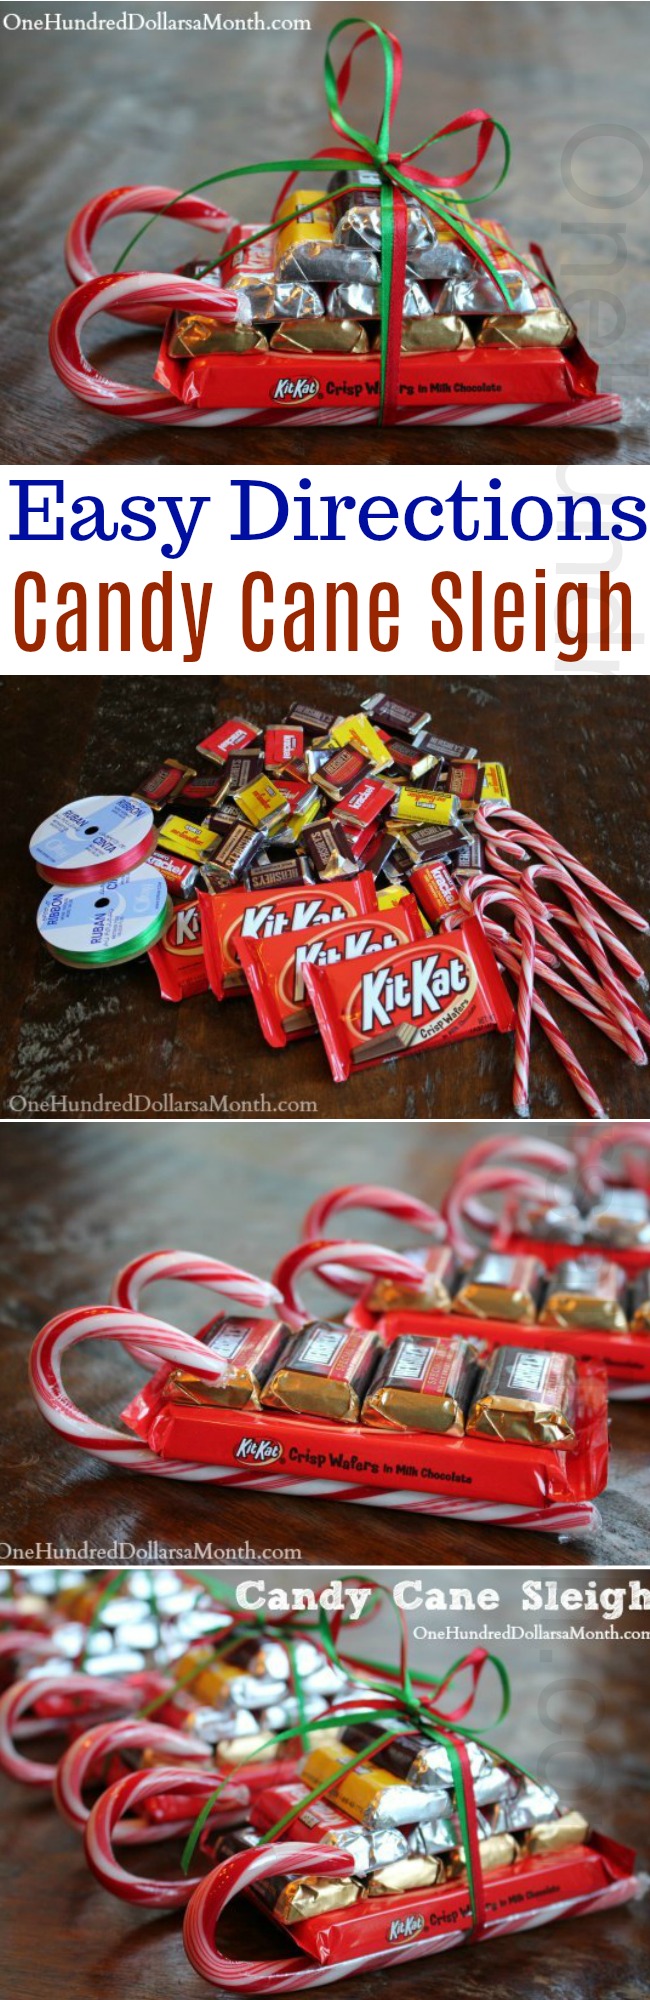 Easy Kids Christmas Candy Crafts – Candy Cane Sleigh